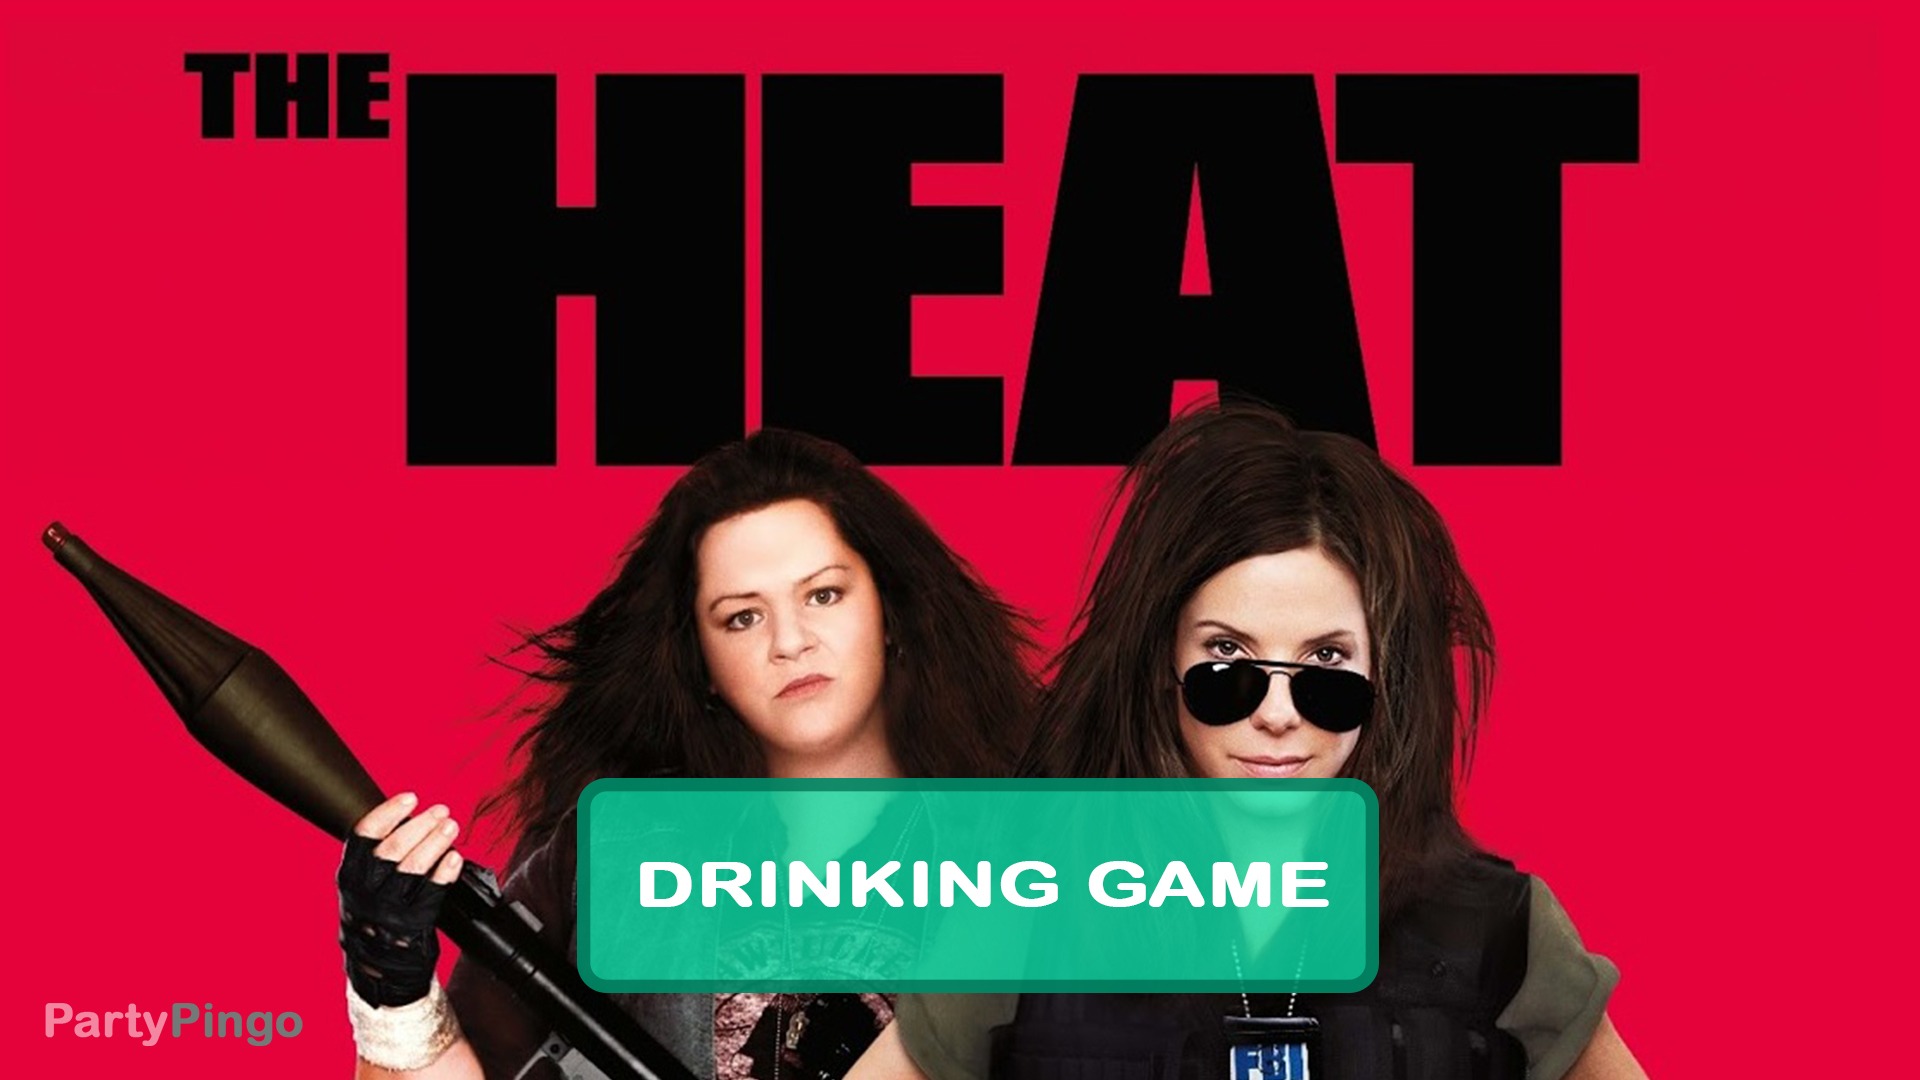 The heat Drinking Game